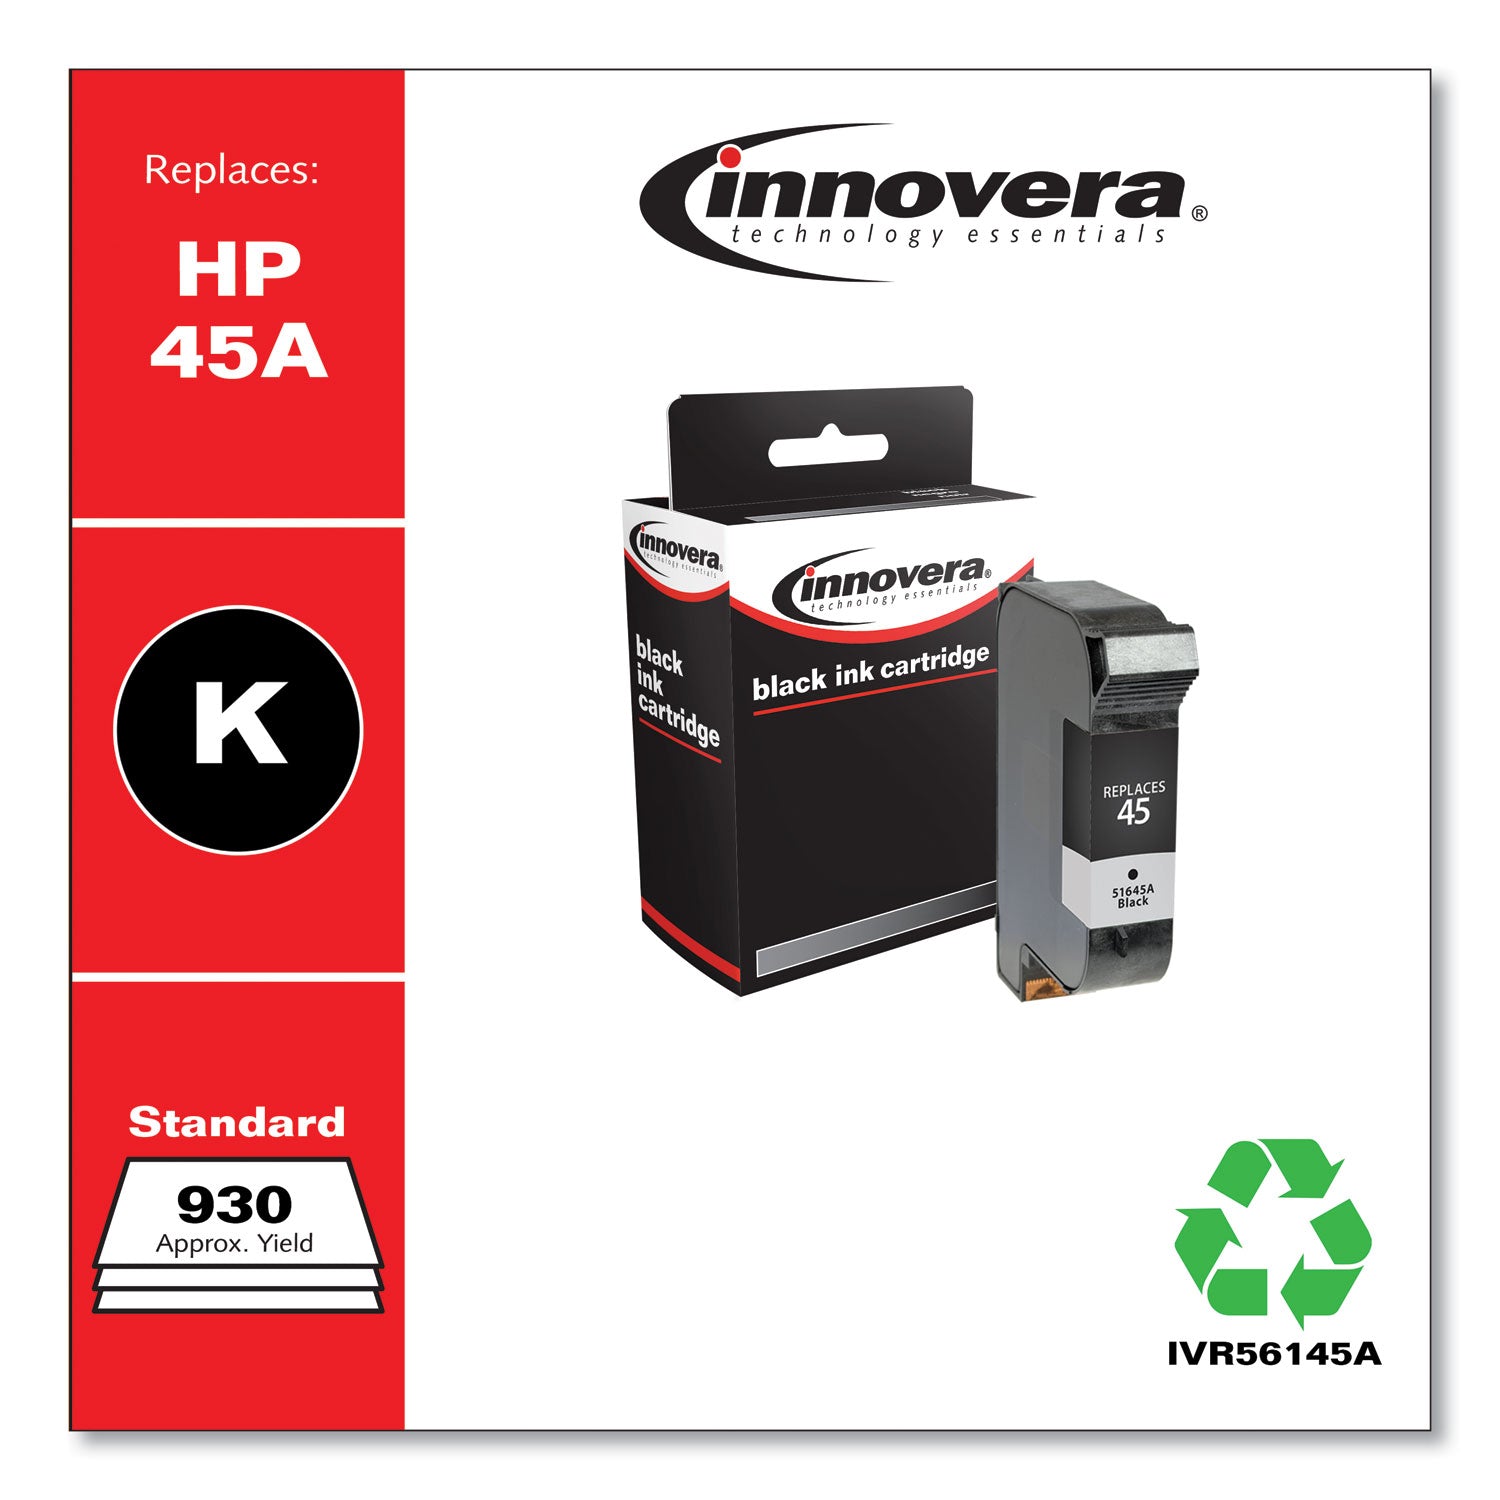 remanufactured-black-ink-replacement-for-45a-51645a-930-page-yield_ivr56145a - 2